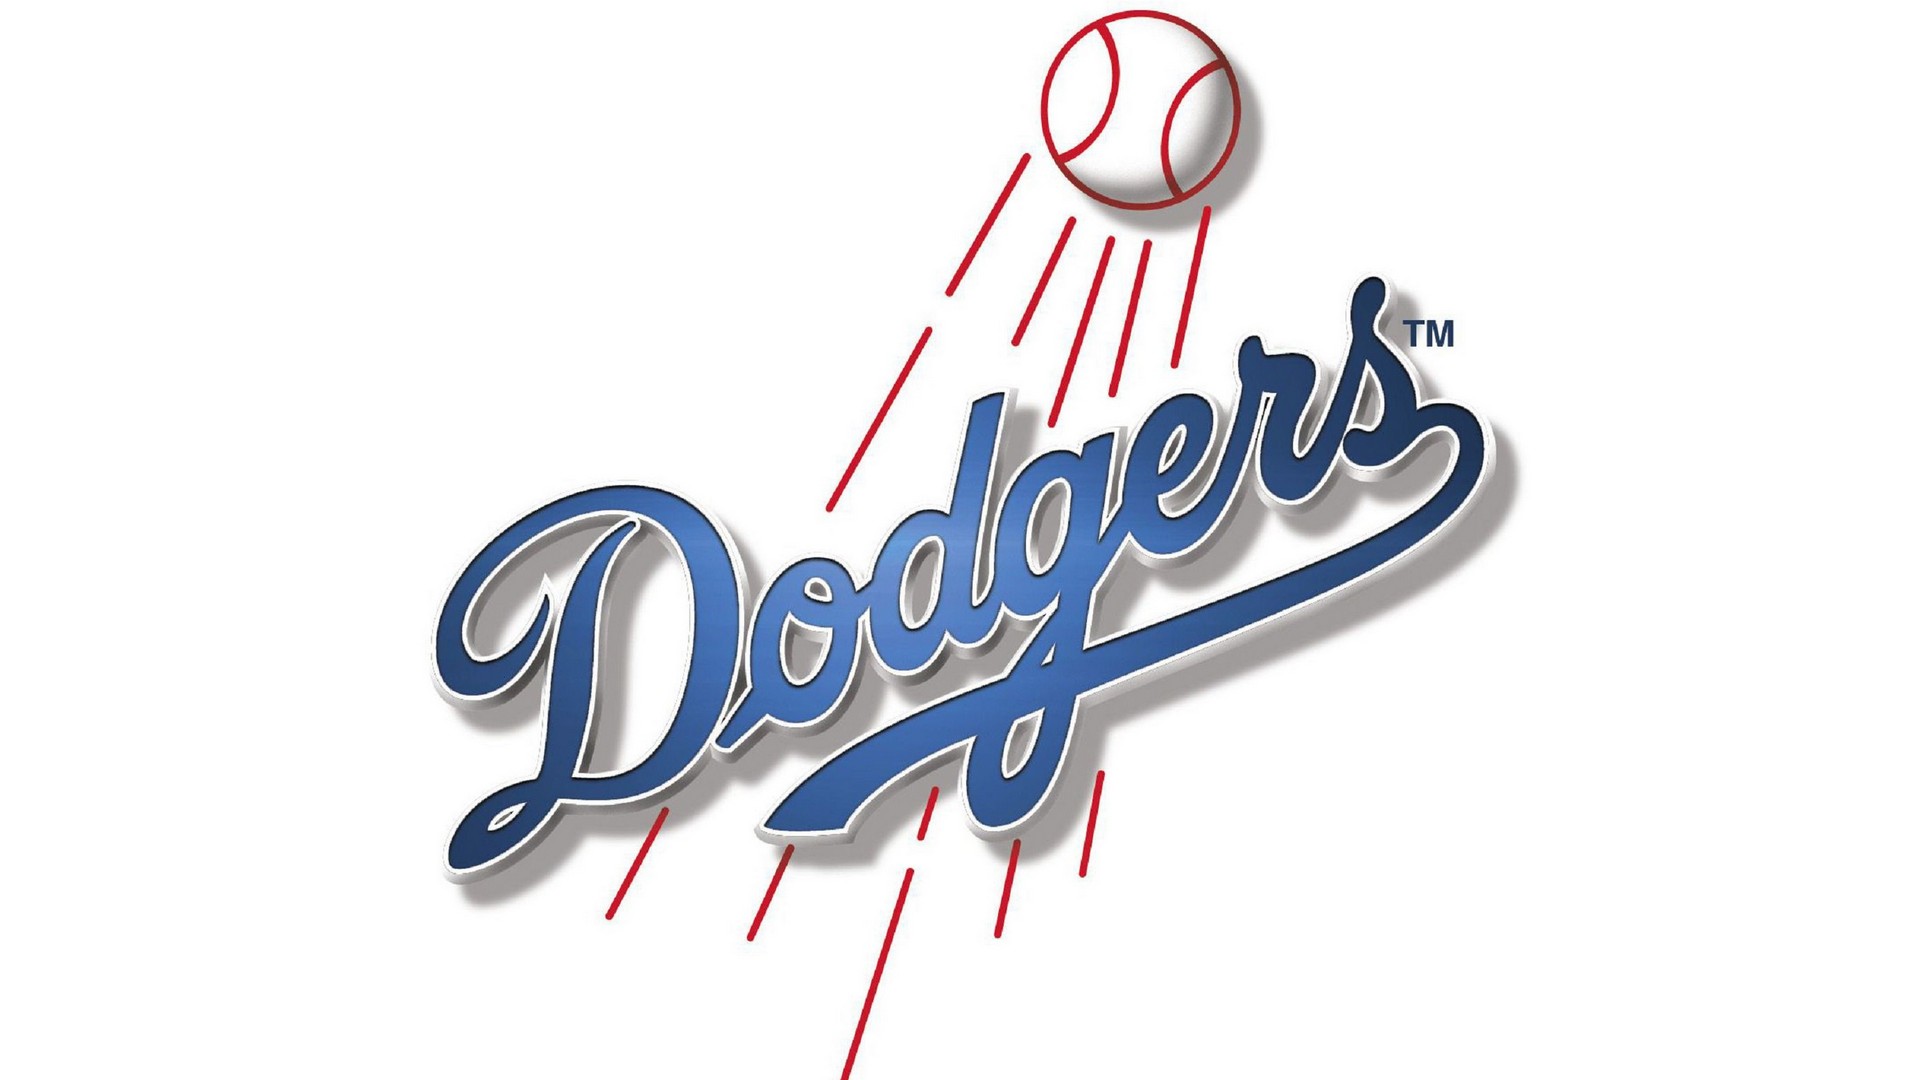 Los Angeles Dodgers MLB For Desktop Wallpaper with high-resolution 1920x1080 pixel. You can use this wallpaper for Mac Desktop Wallpaper, Laptop Screensavers, Android Wallpapers, Tablet or iPhone Home Screen and another mobile phone device